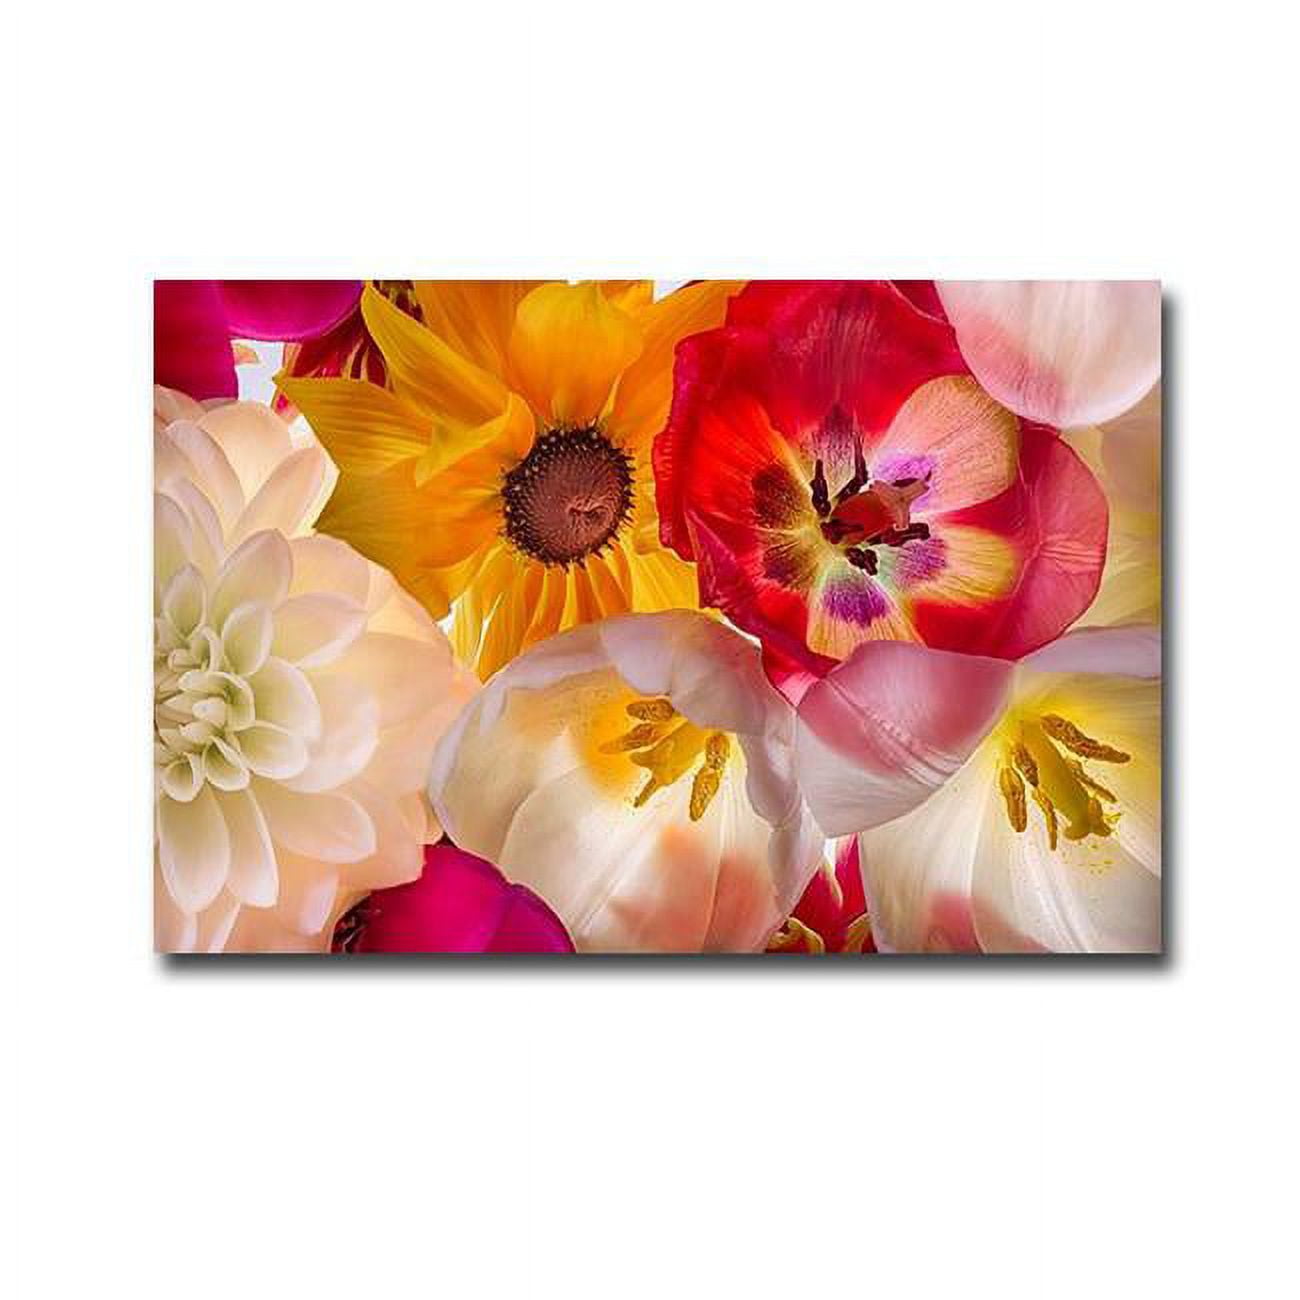 1218a729eg When Flowers Talk By Davis Premium Gallery Wrapped Canvas Giclee Art - 12 X 18 X 1.5 In.